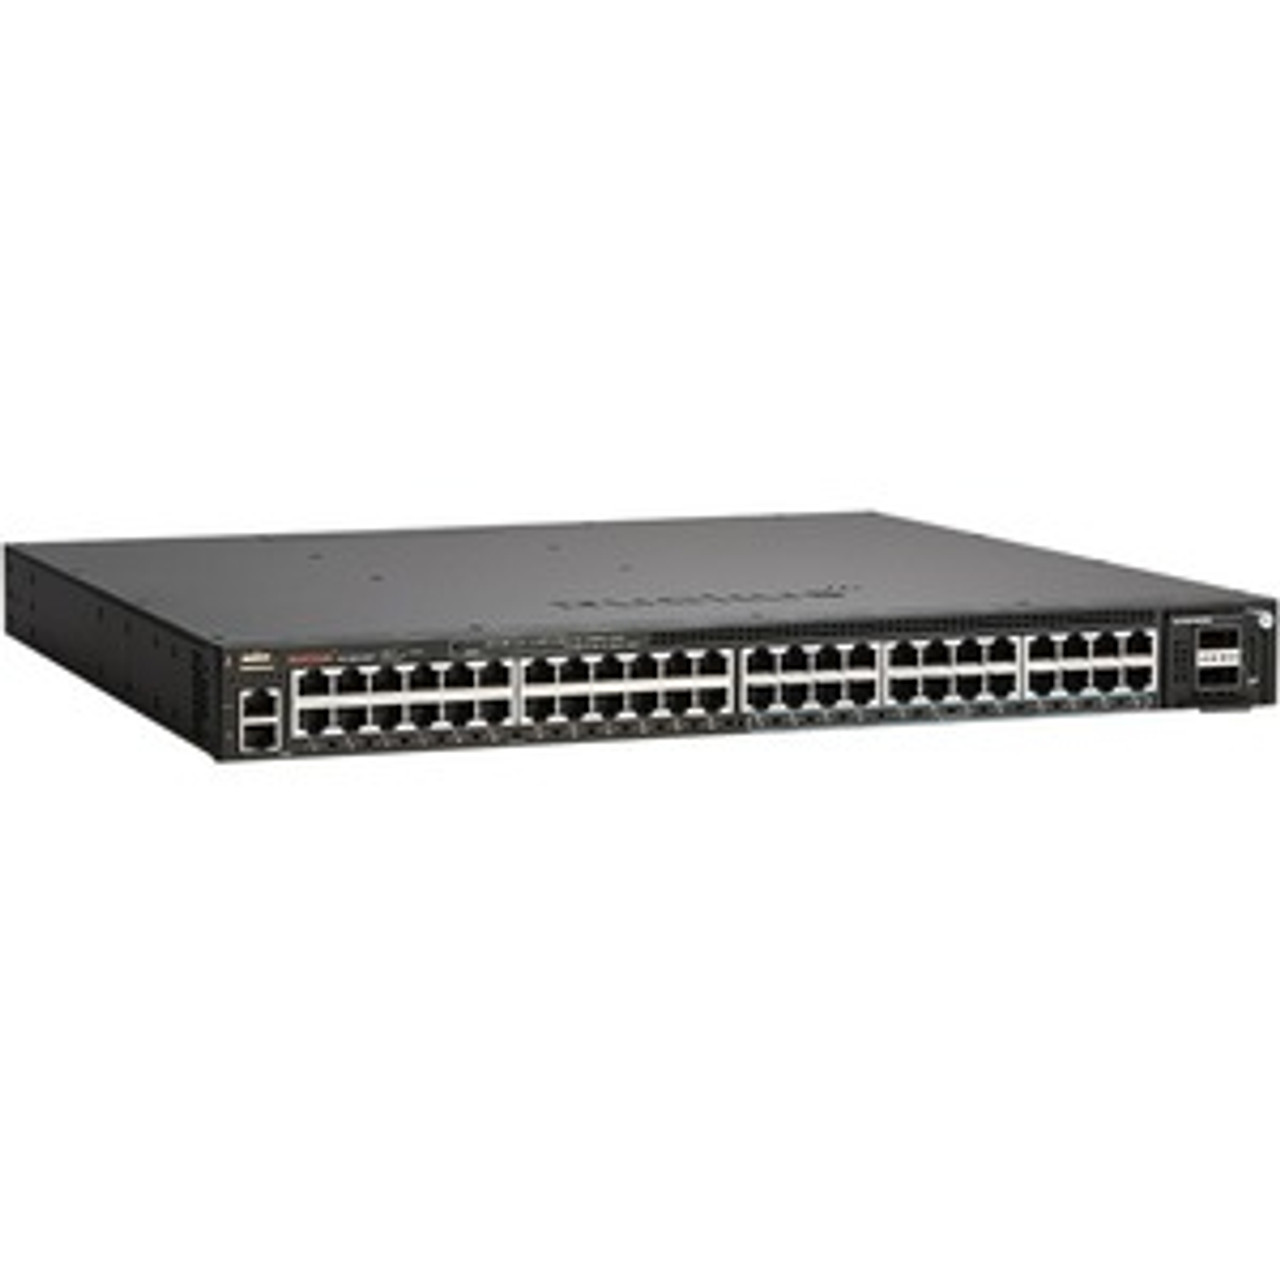 ICX7650-48ZP-E2 Ruckus Wireless ICX 7650-48ZP Layer 3 Switch - 48 Ports - Manageable - 3 Layer Supported - Modular - Twisted Pair, Optical Fiber - 1U High -